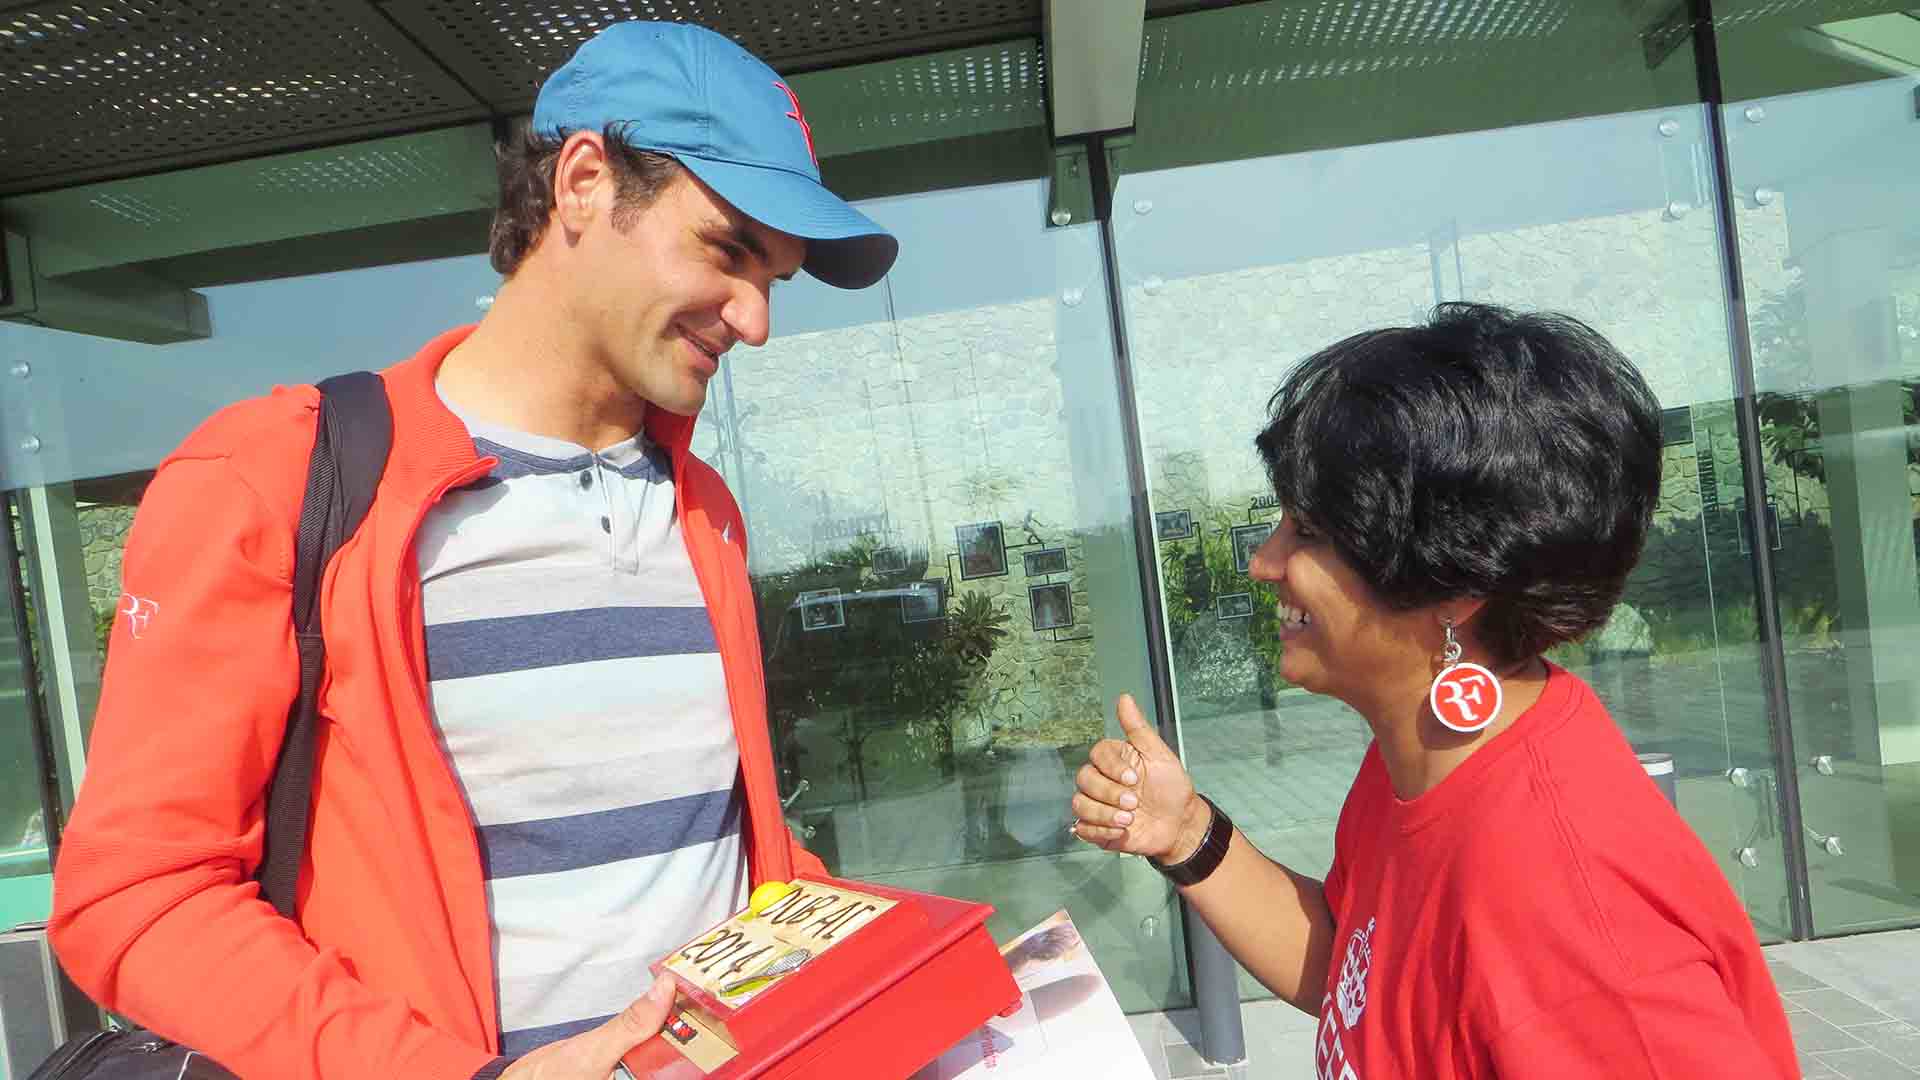 Sunita Sigtia has attended more than 100 <a href='https://www.atptour.com/en/players/roger-federer/f324/overview'>Roger Federer</a> matches around the world.